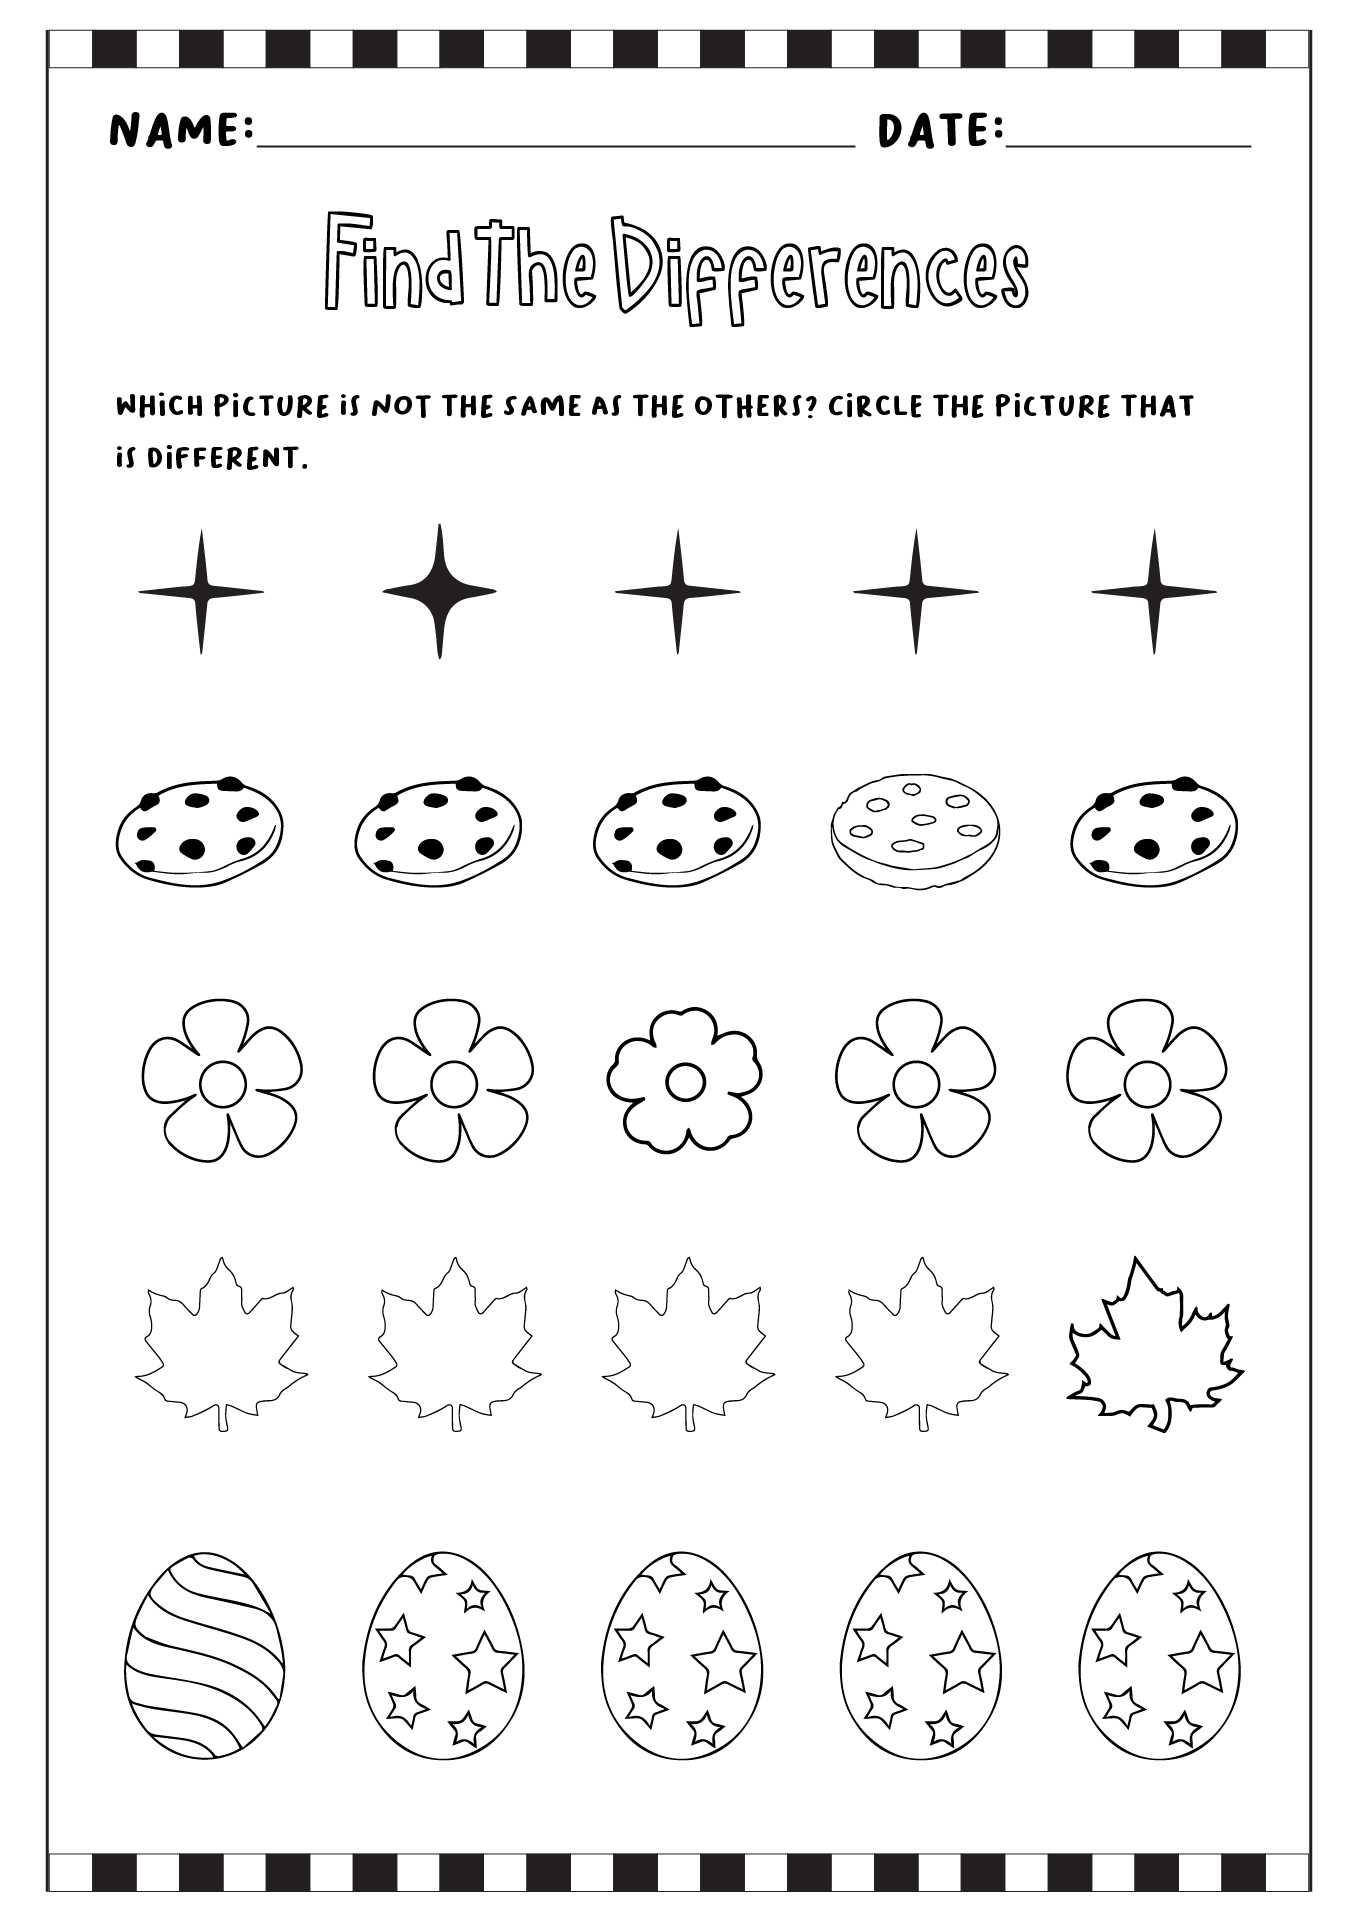 Find the Differences Worksheet